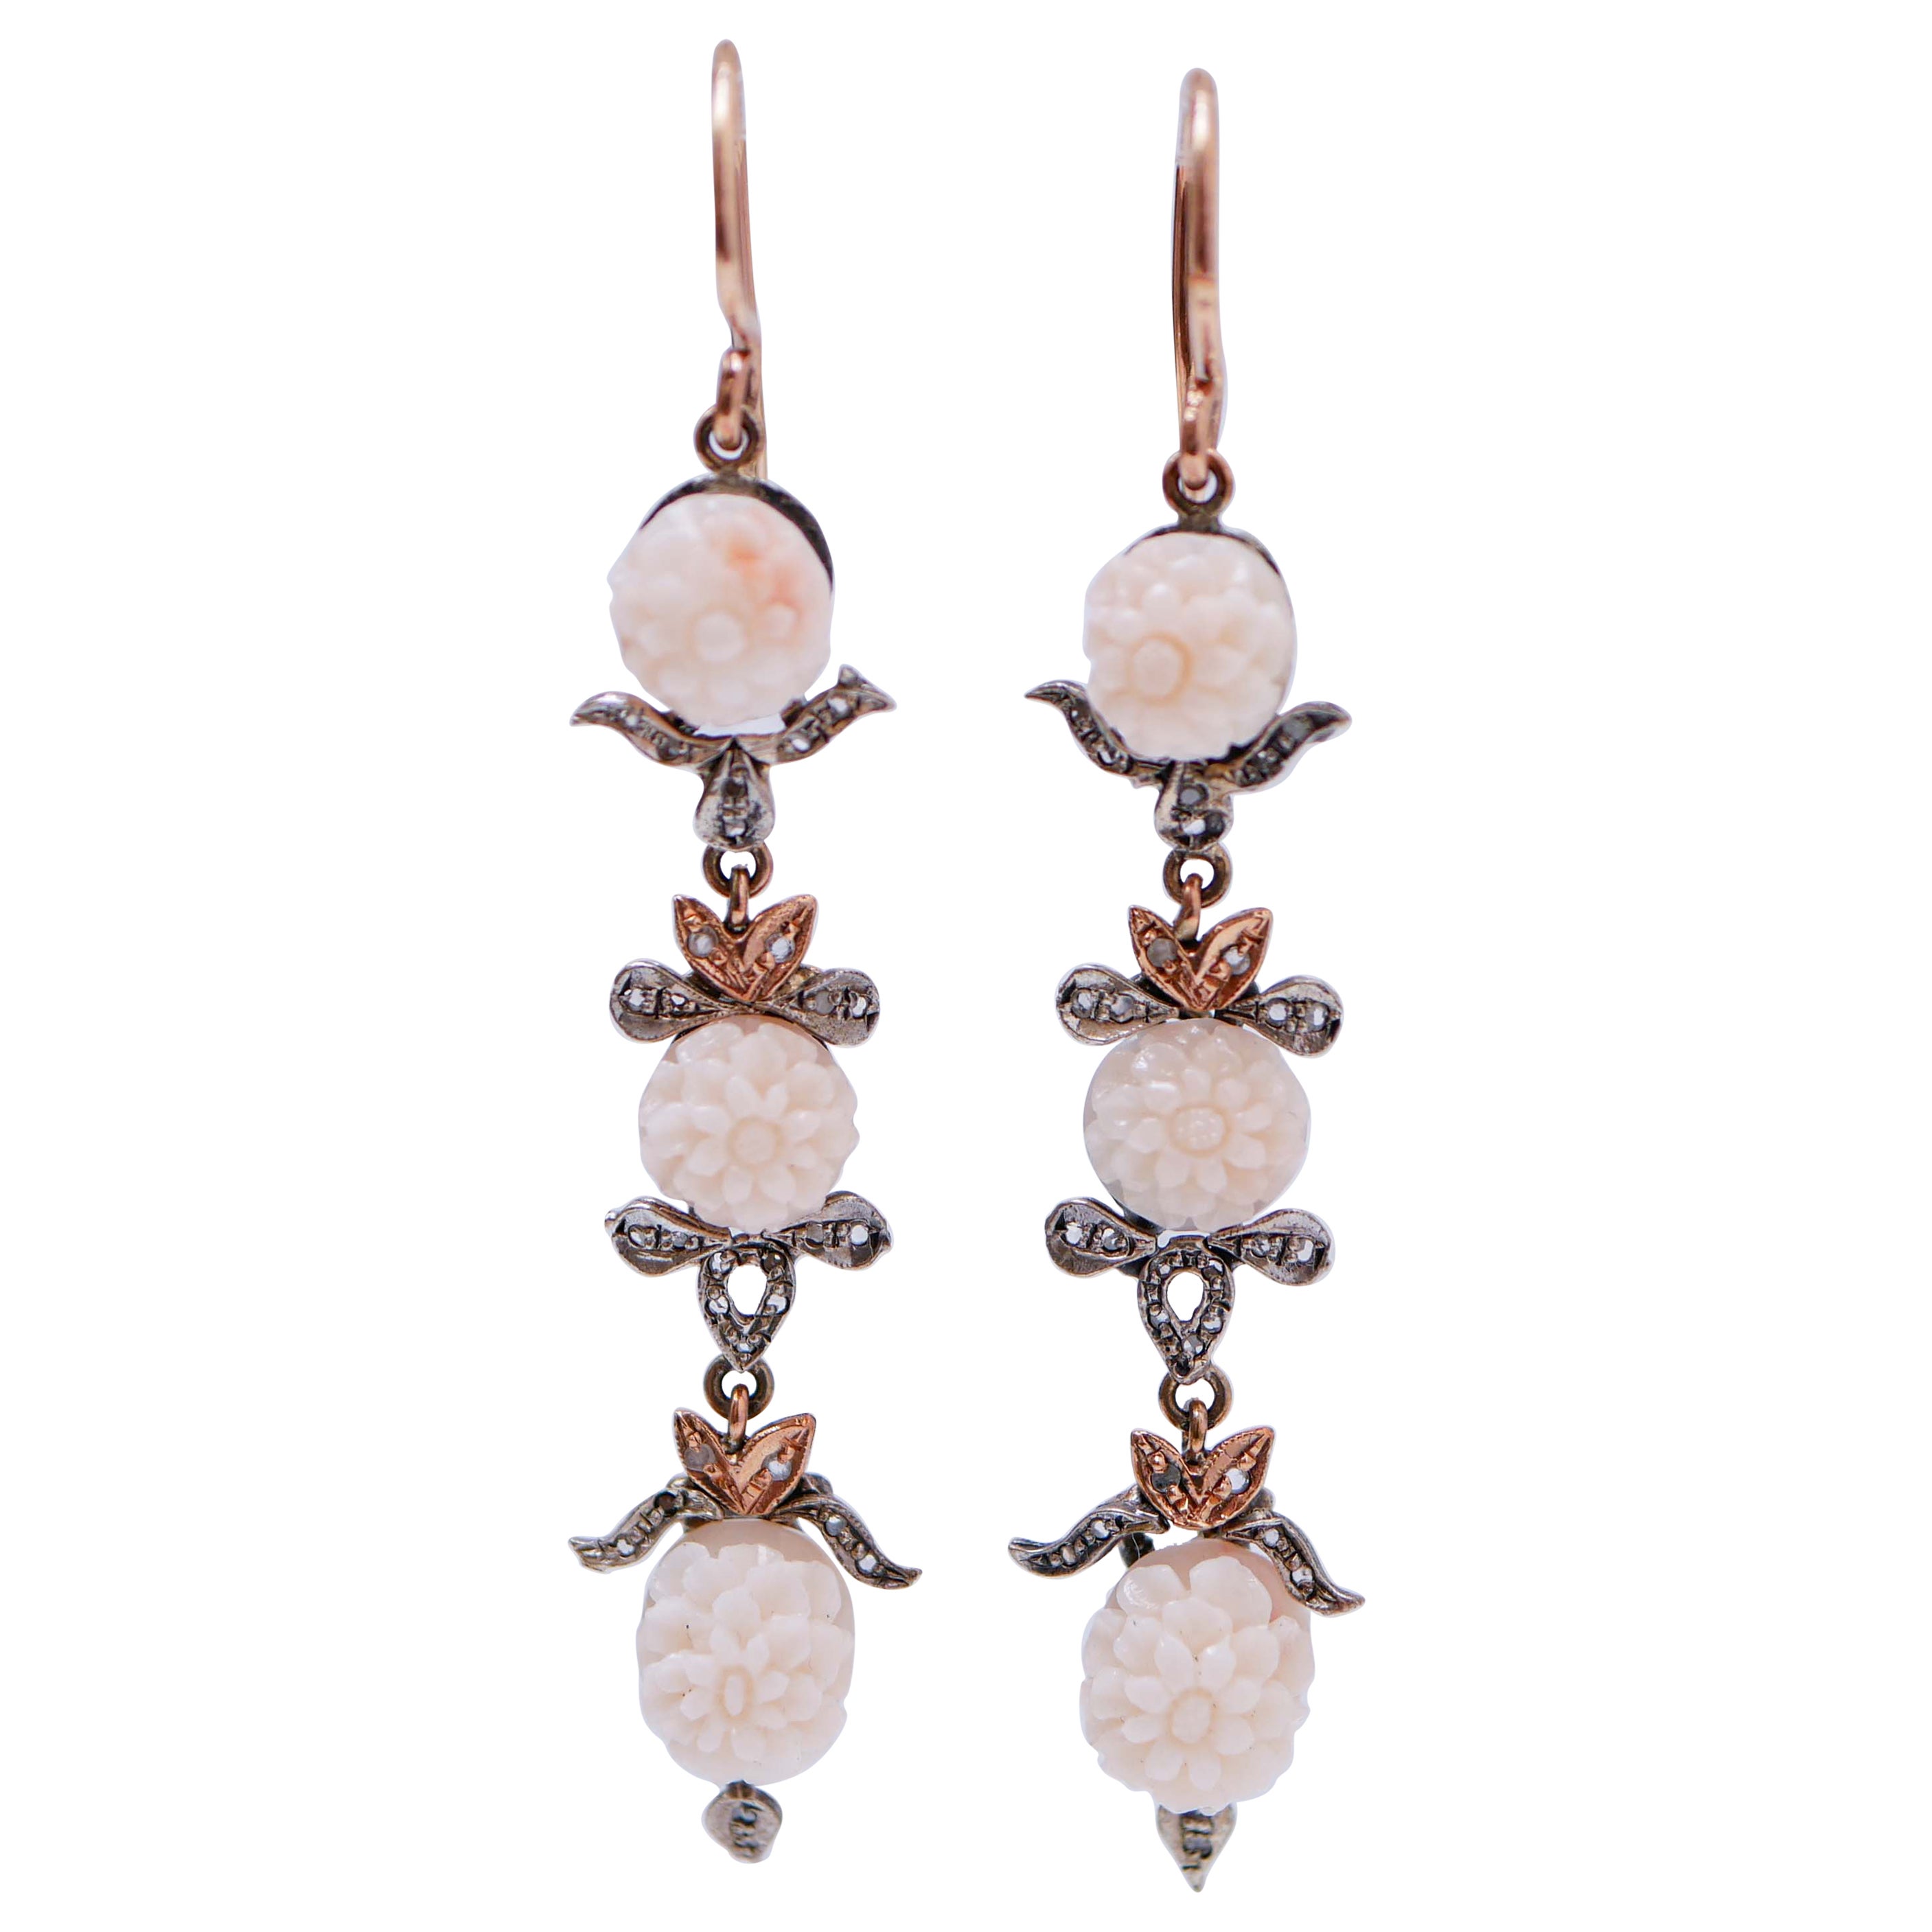 Corals, Diamonds, Rose Gold and Silver Retrò Earrings.